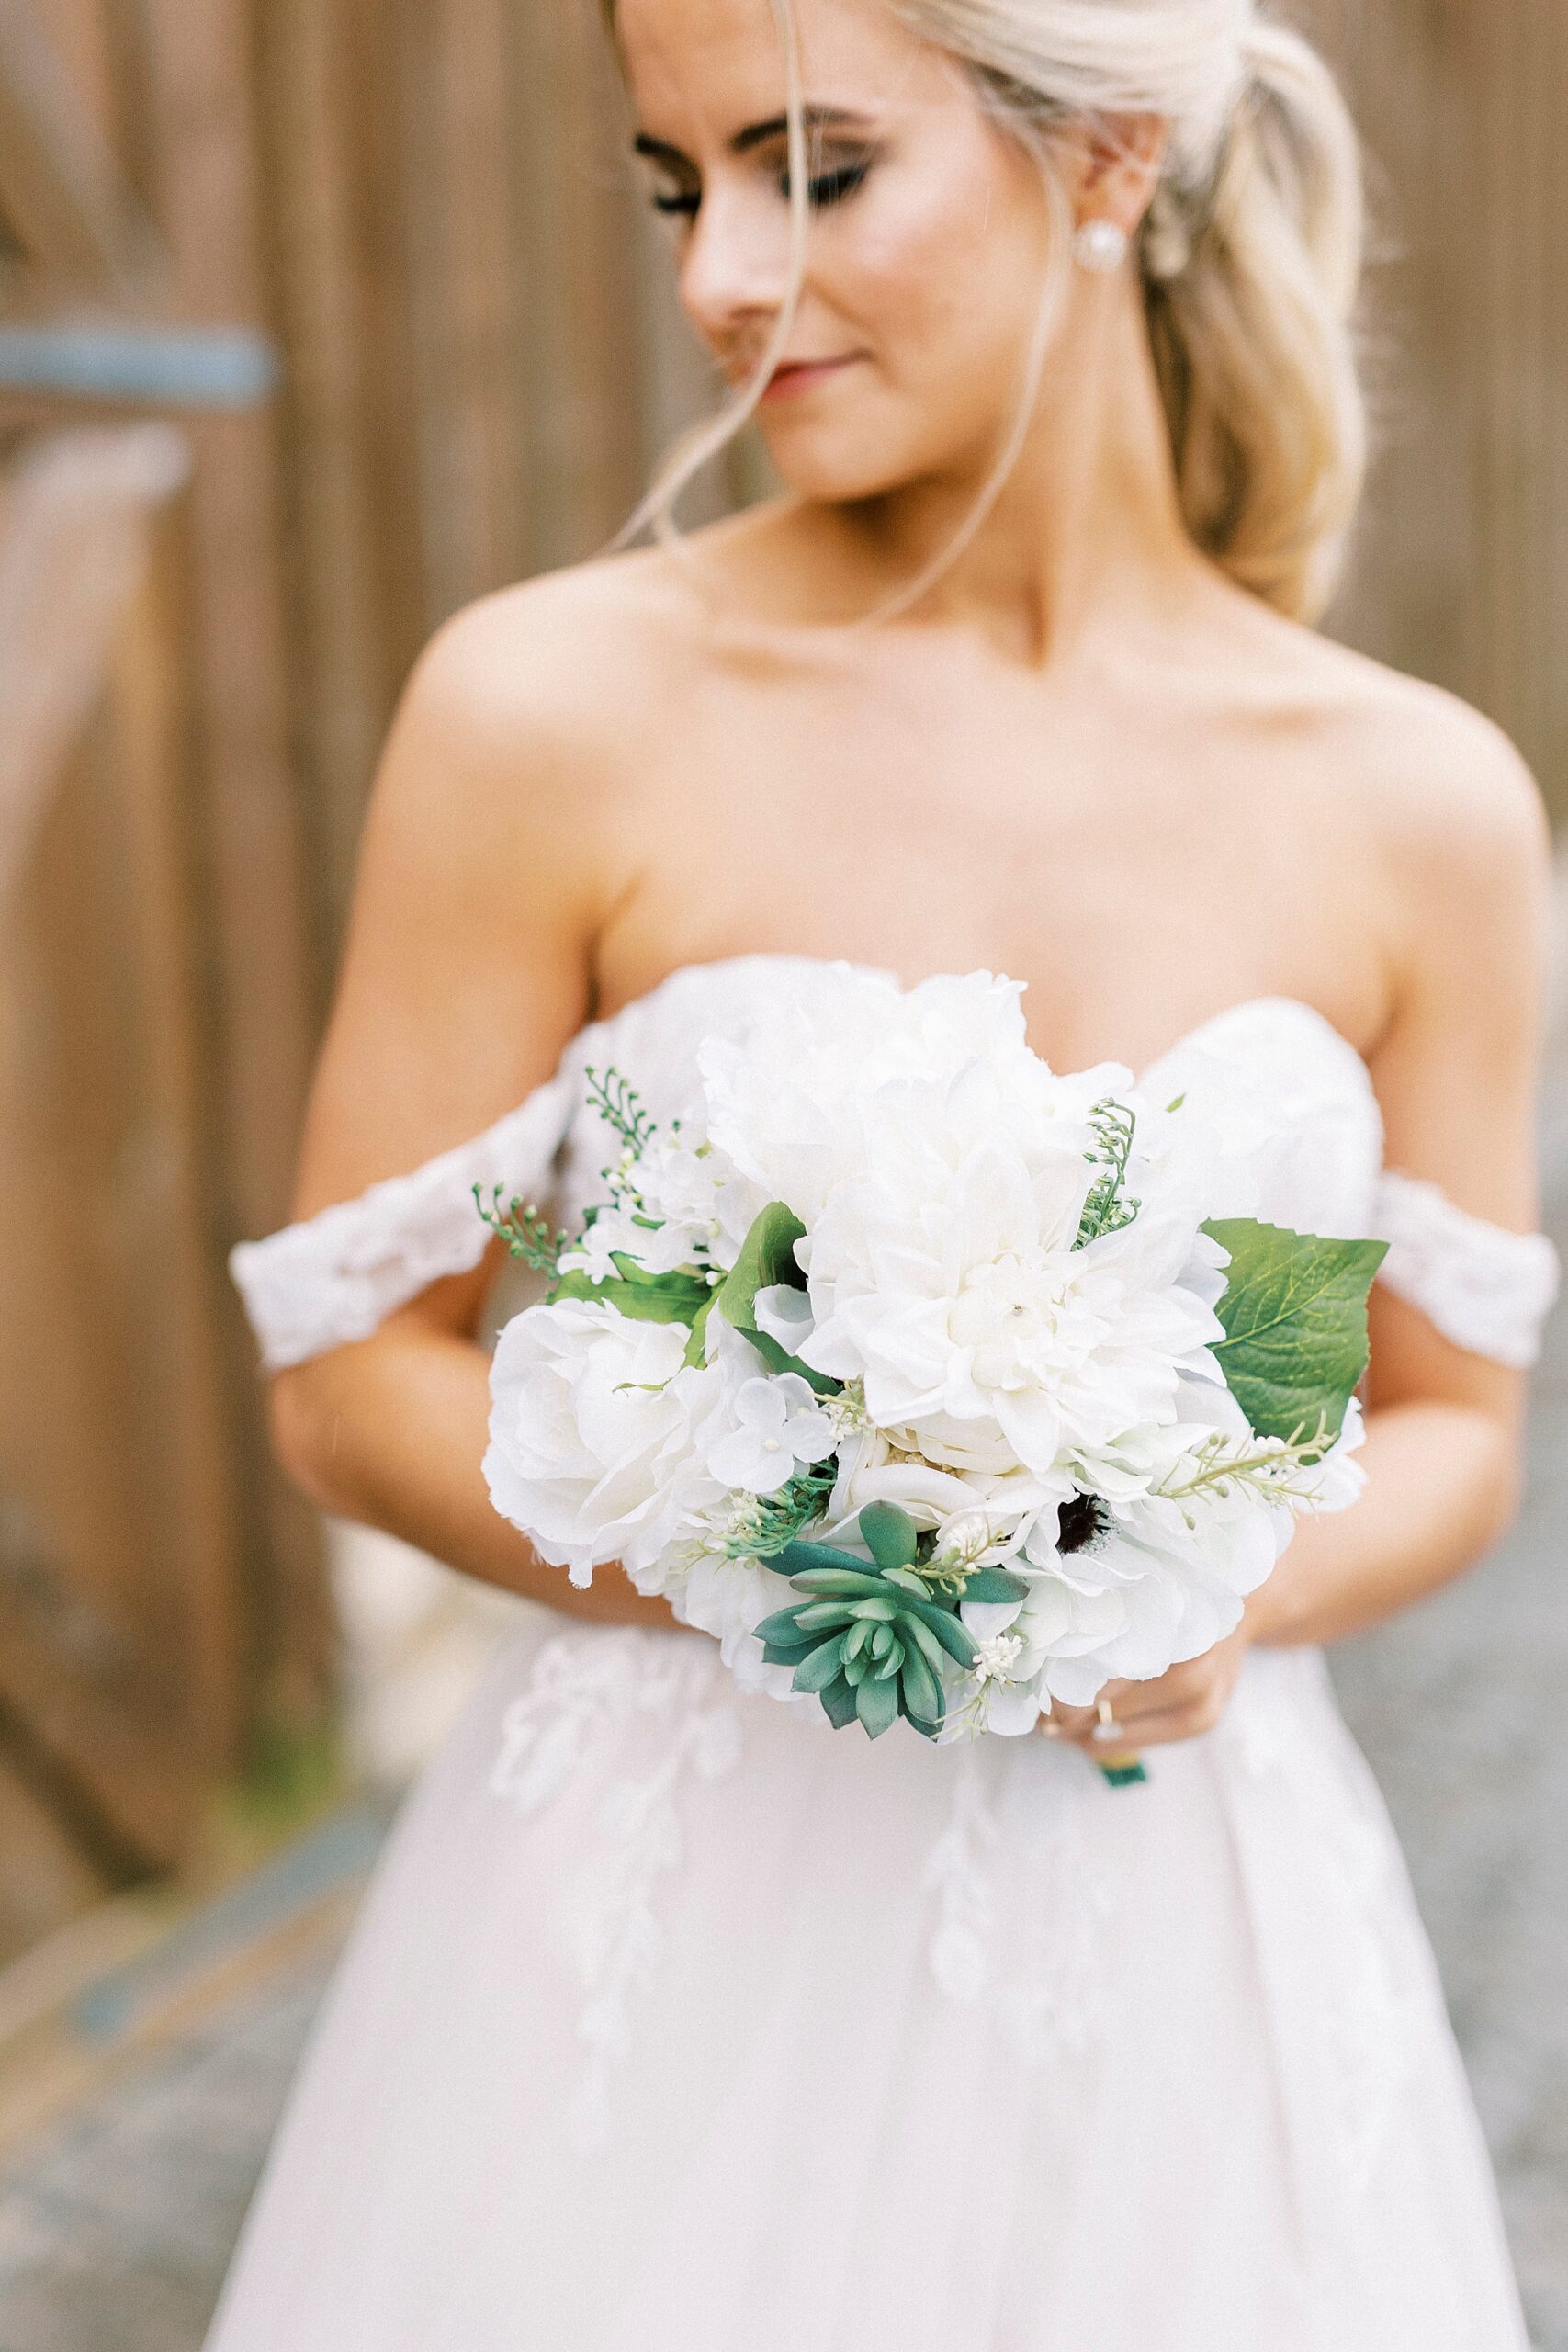 bride holds bouquet of white flowers and succulents by corset top of wedding gown 